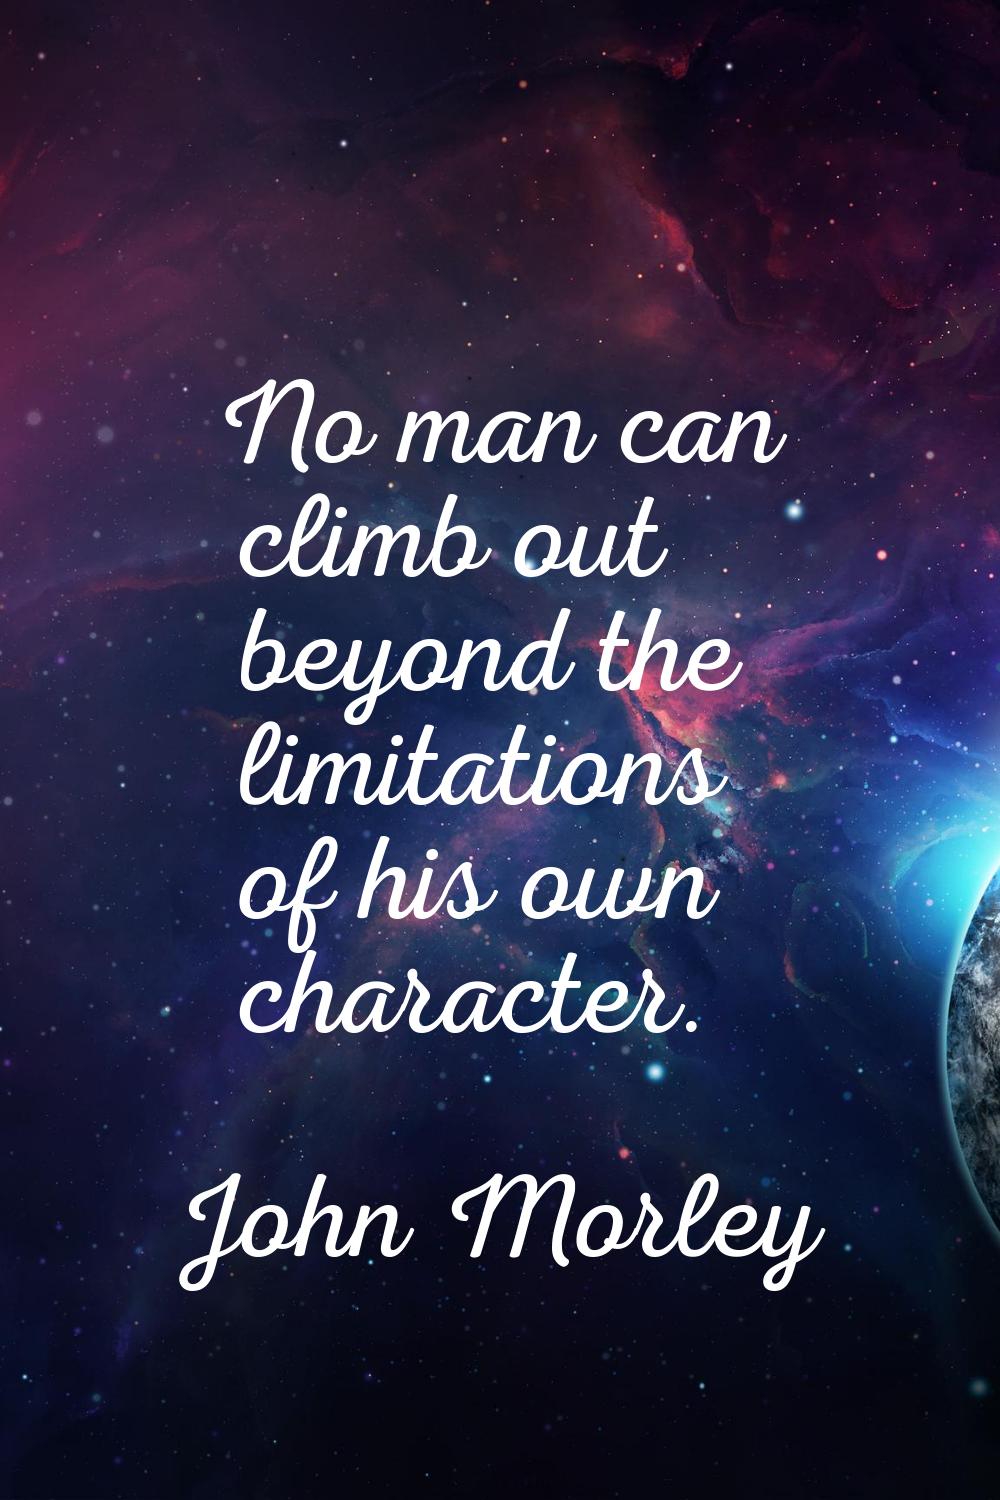 No man can climb out beyond the limitations of his own character.